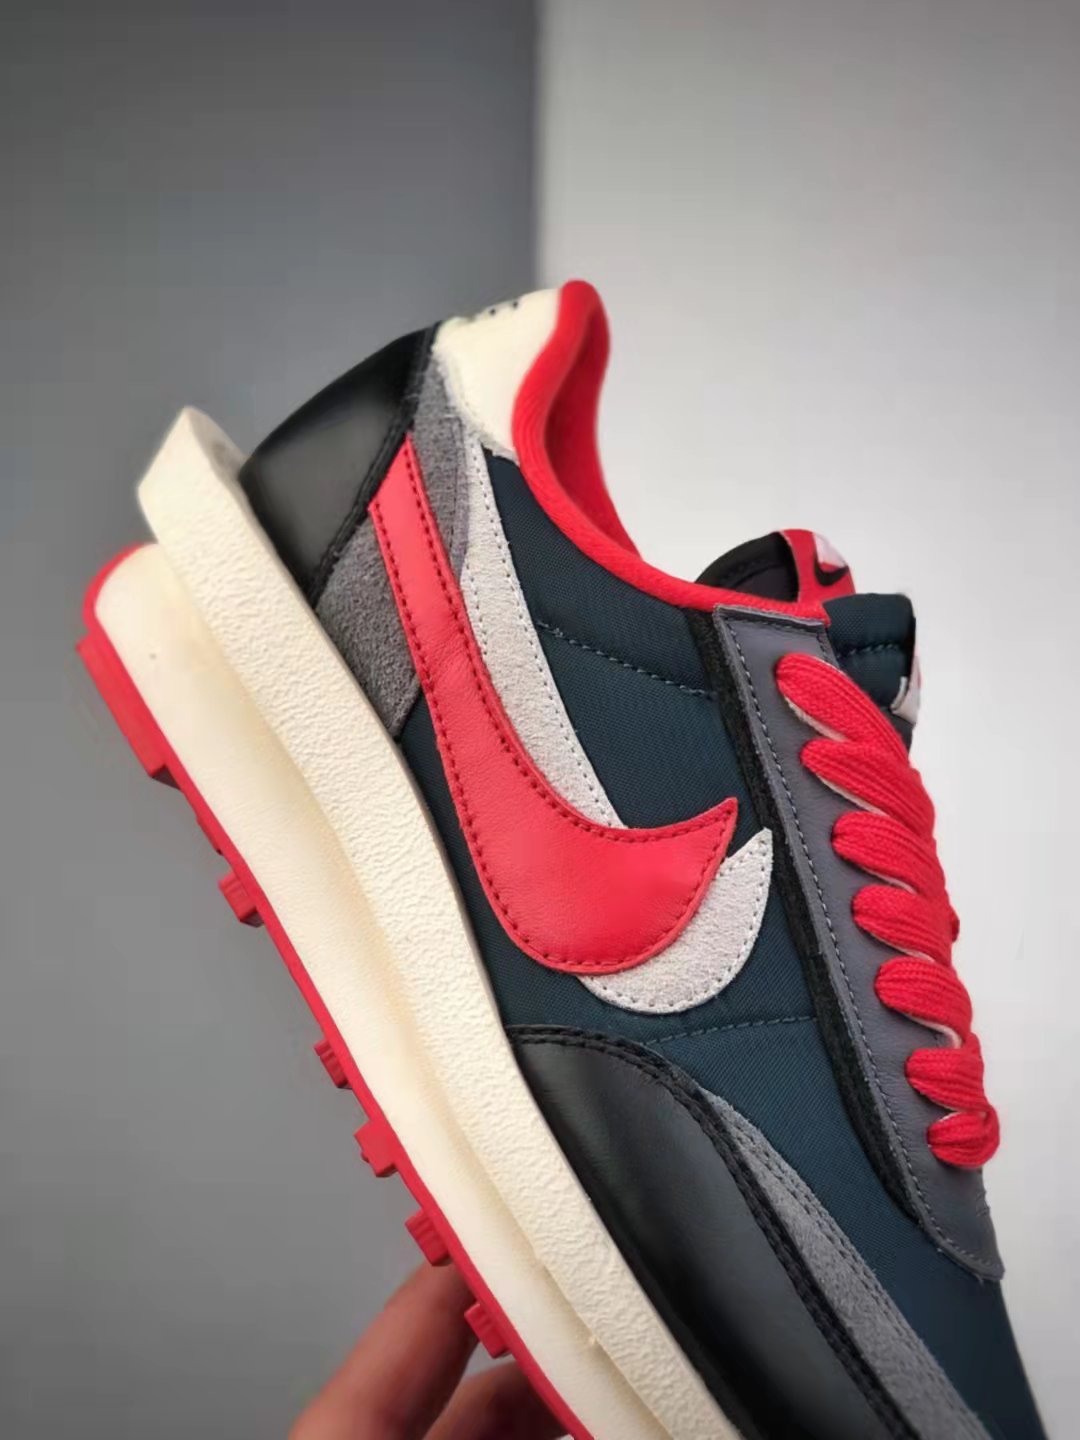 Nike sacai x Undercover x LDWaffle 'Midnight Spruce University Red' DJ4877-300 | Limited Edition Collaborative Sneaker